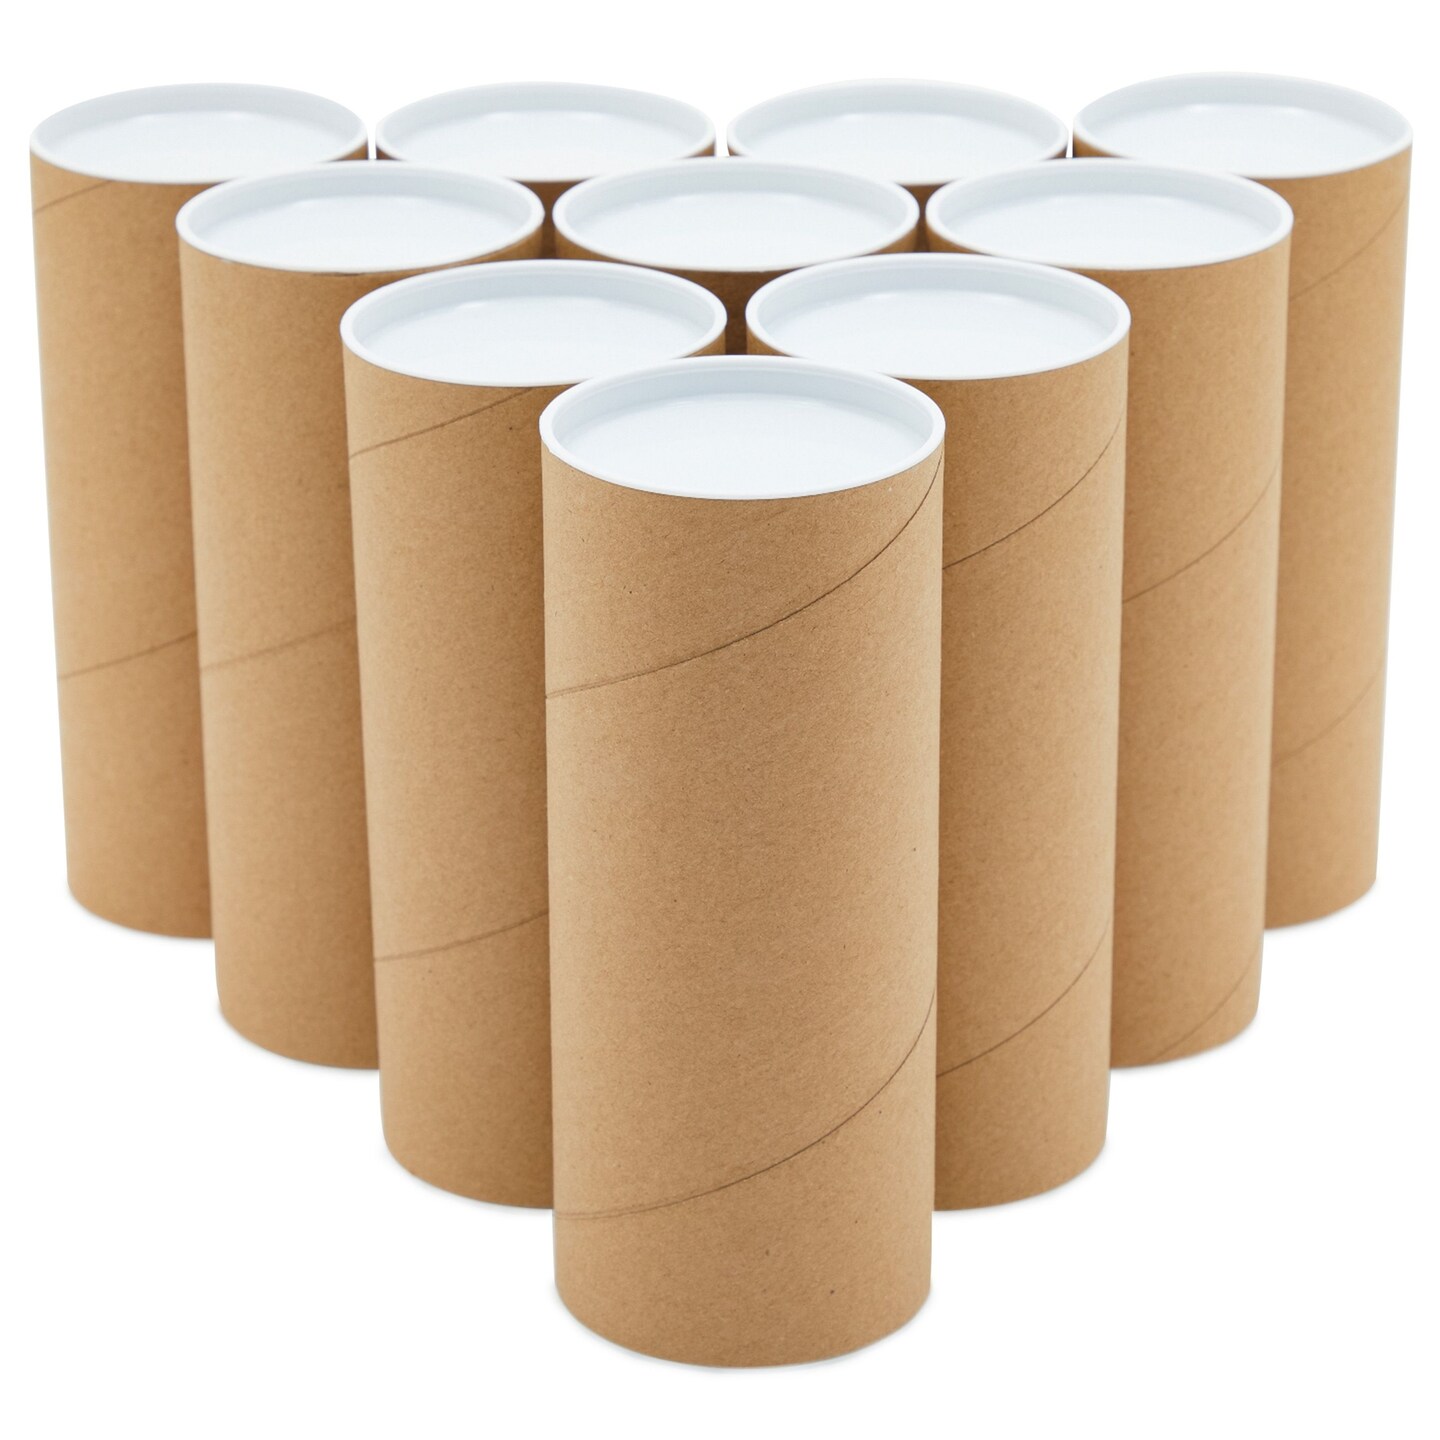 10-Pack Mailing Tubes with Caps for Packaging Posters, 3x7 Inch Round  Cardboard Mailers for Artwork, Advent Calendars, Classroom Craft, DIY  Projects, Gifts